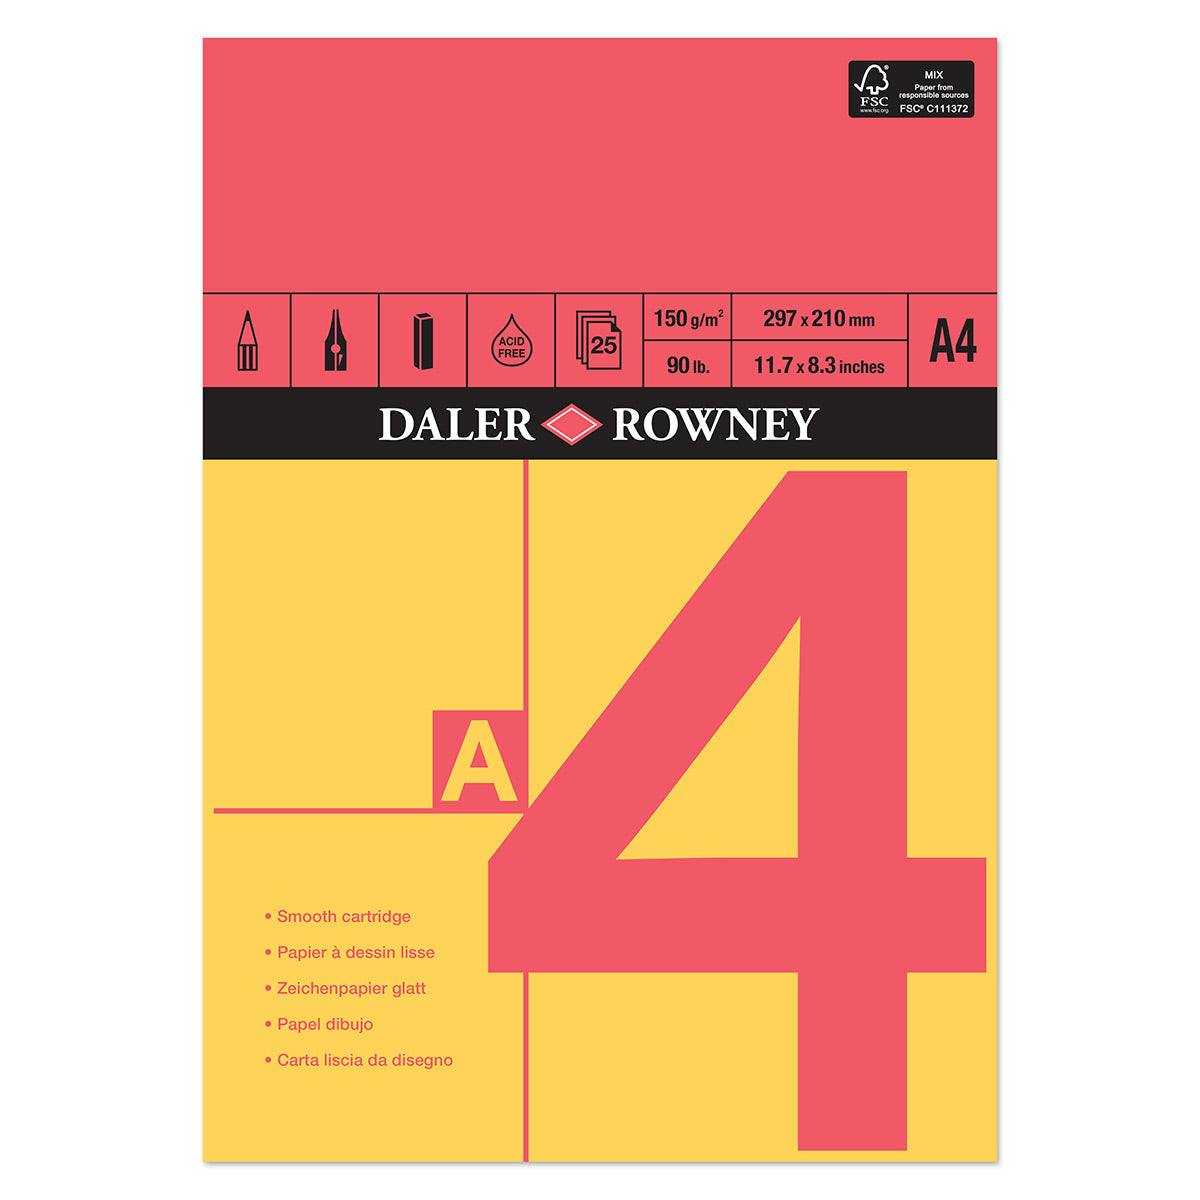 Daler Rowney - Red & Yellow Gummed Cartridge Sketch Pad - A4 - 150gsm